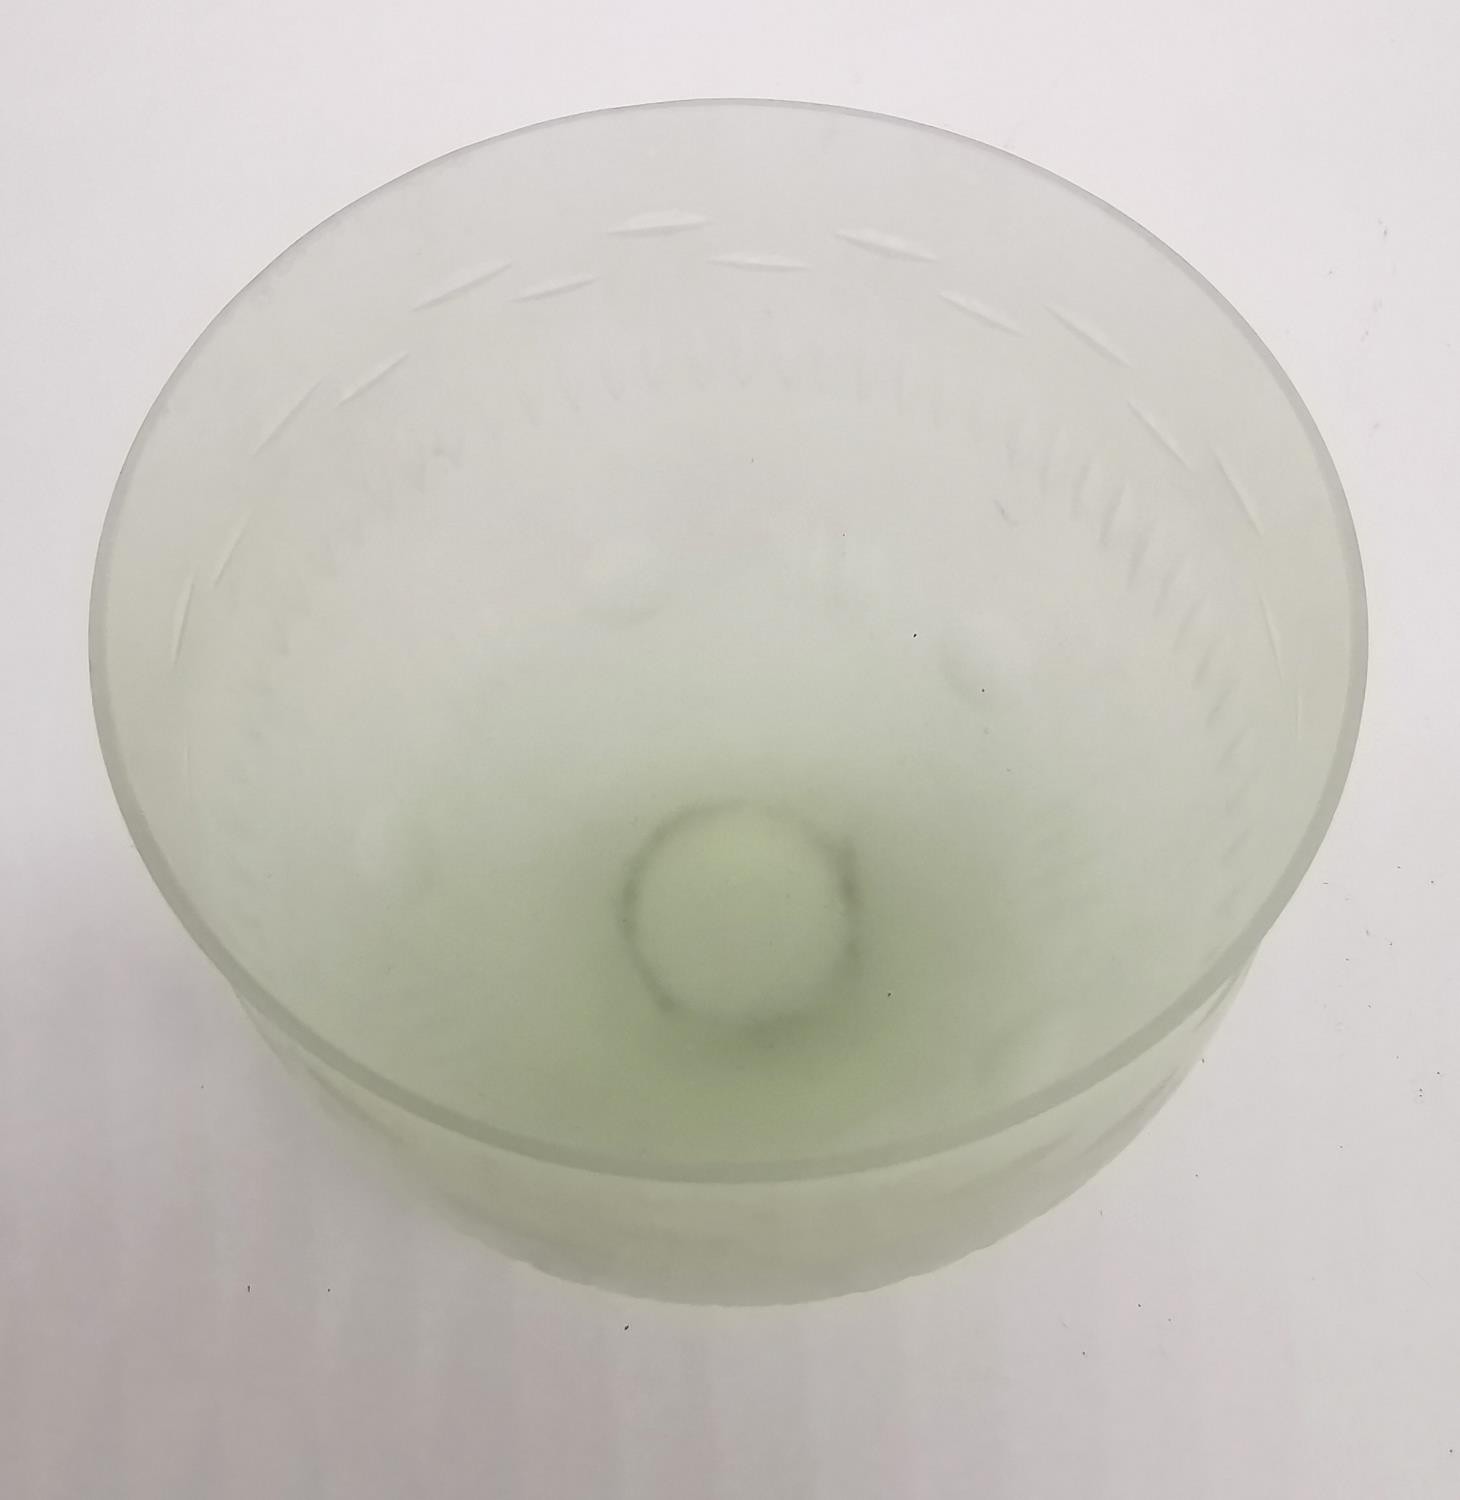 A CCAA Glasgalerie RGM/RCM glass roman replica frosted bowl with green hue fading to opaque with - Image 9 of 10